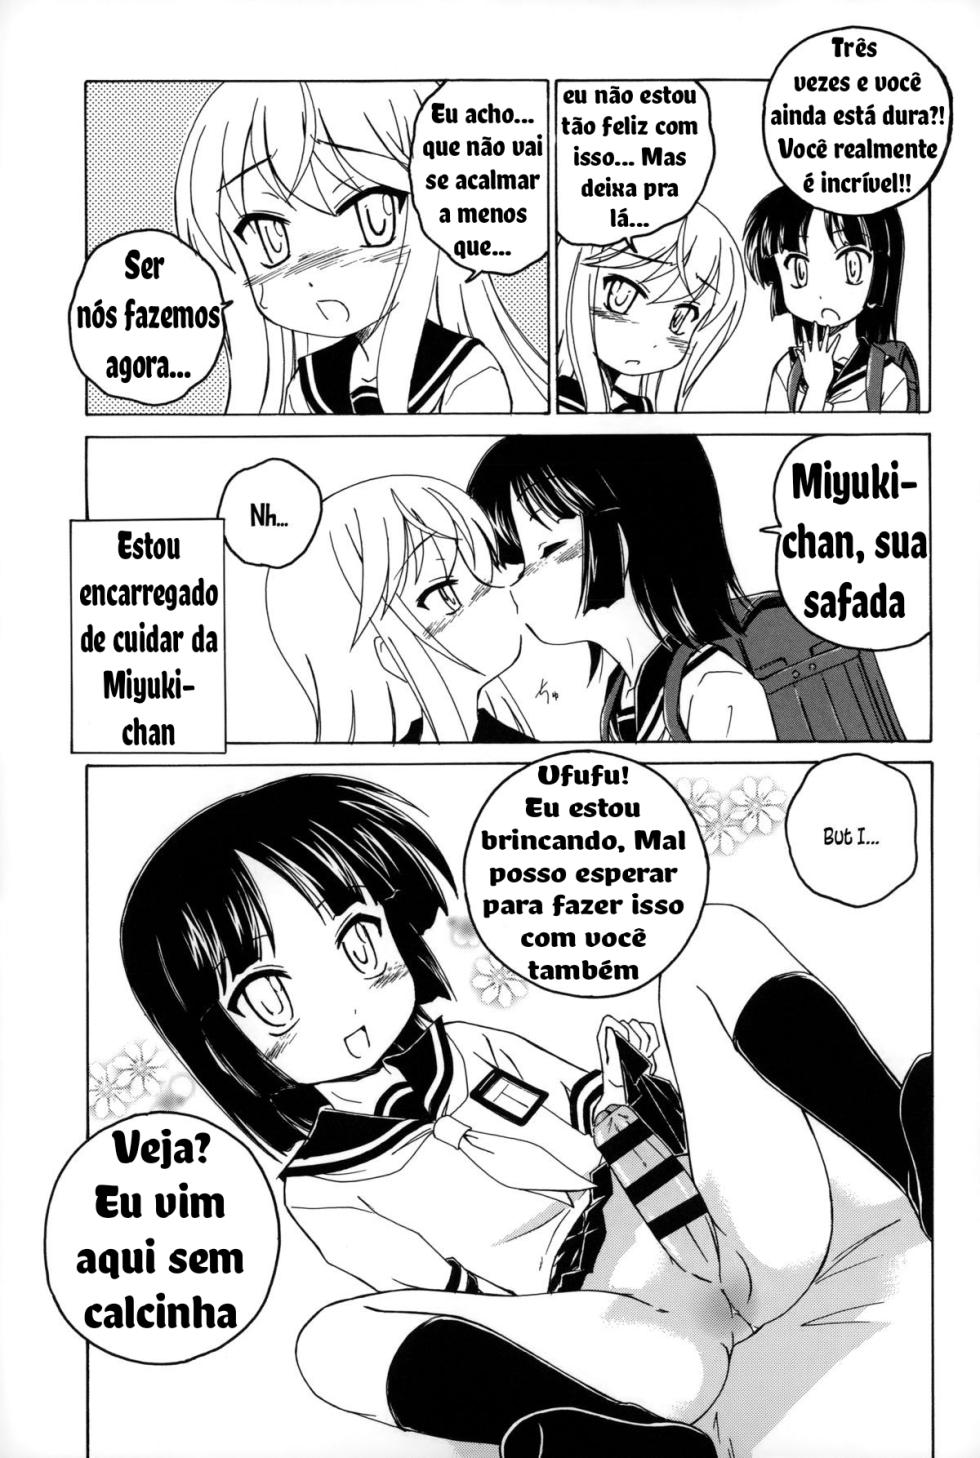 The secret of Girls flowers - Page 3